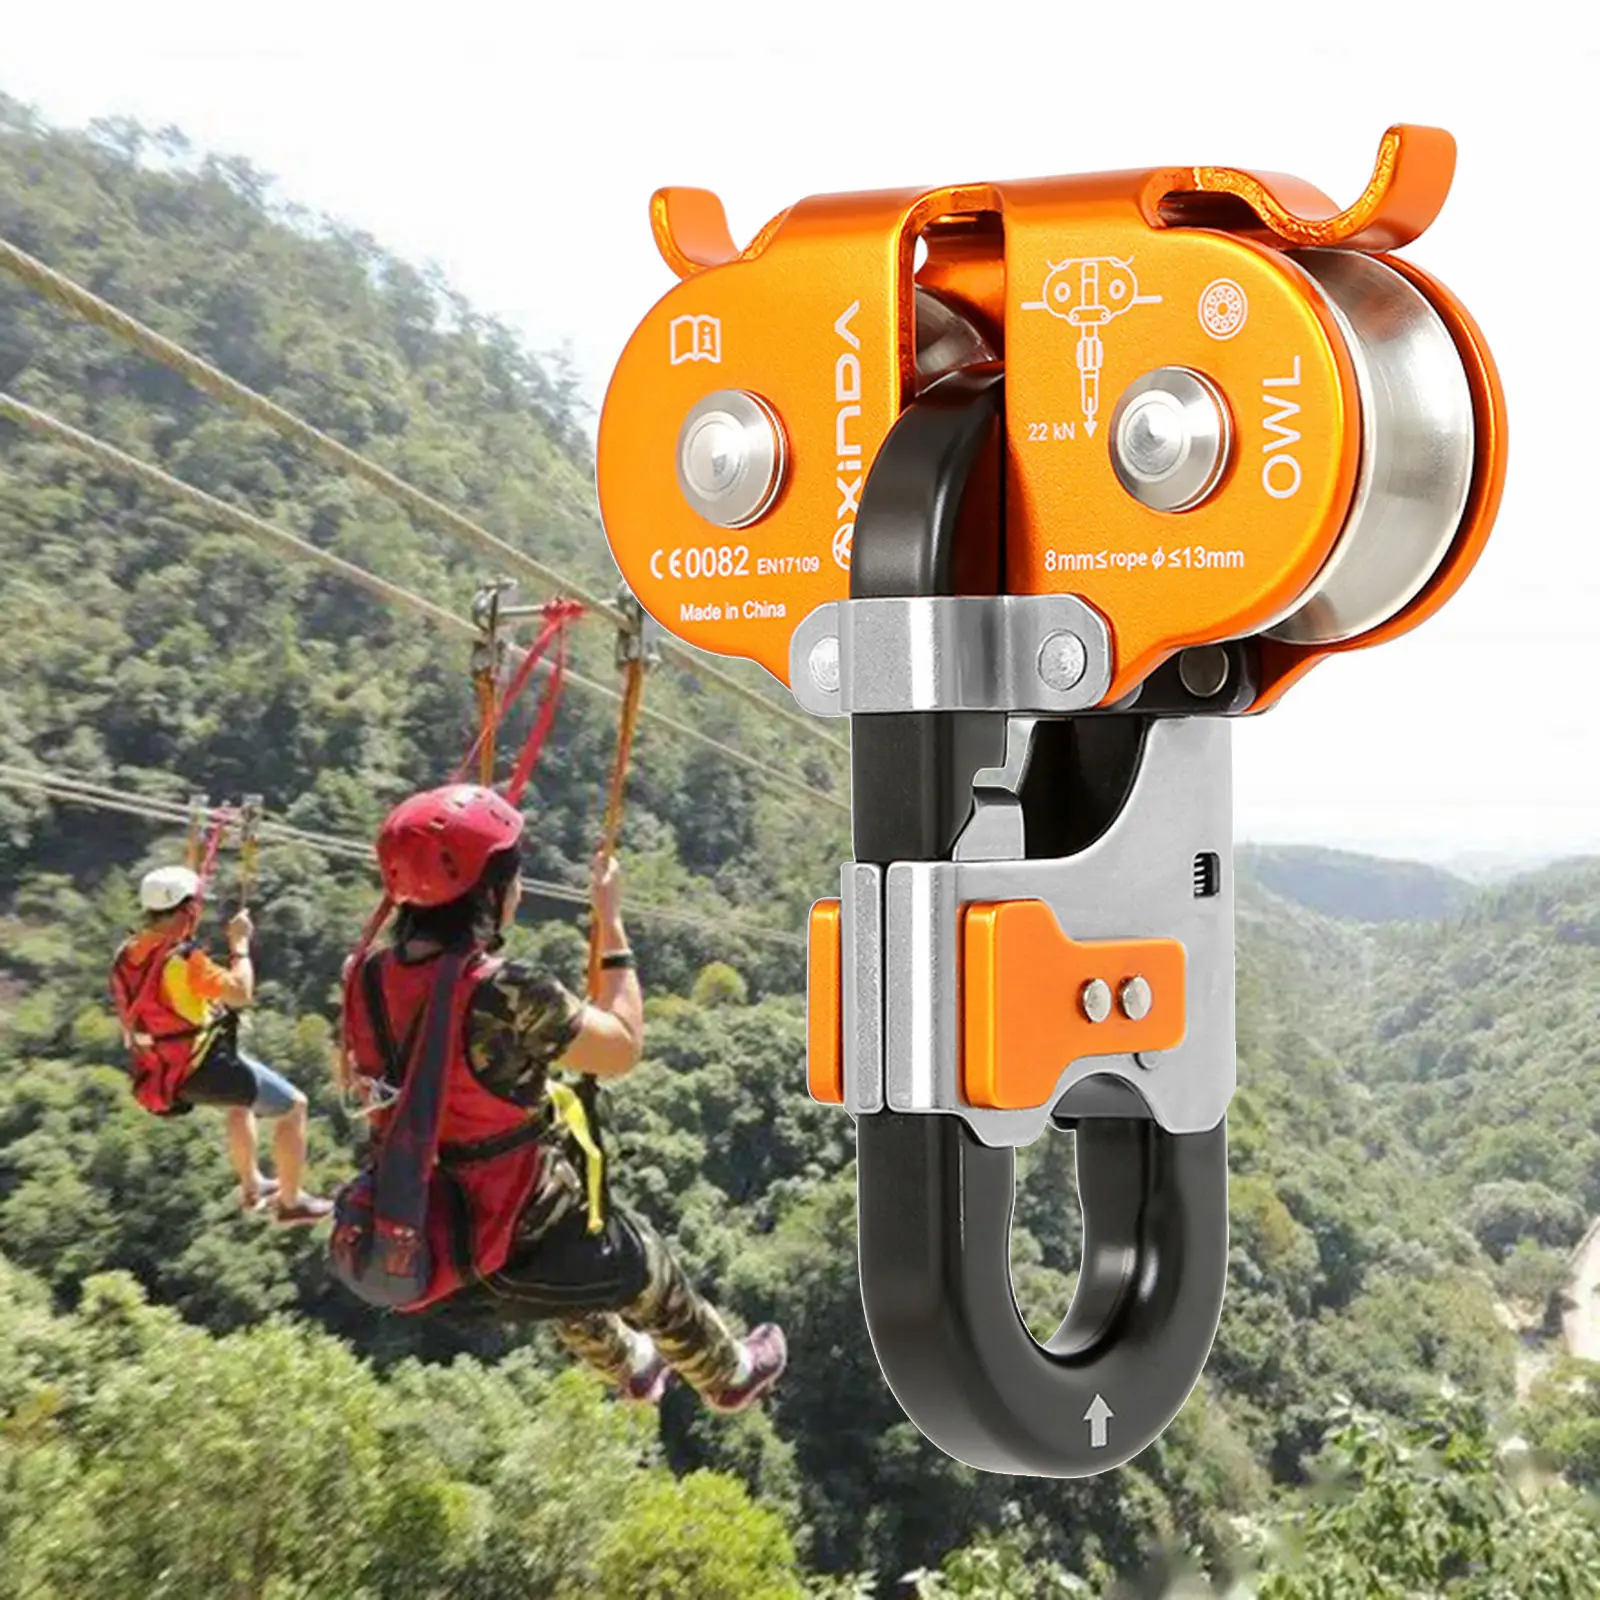 22KN/4850lbs Rock Climbing Zip Line Cable Dual Pulley for Trucking Lifting Rigging System Outdoor Trips